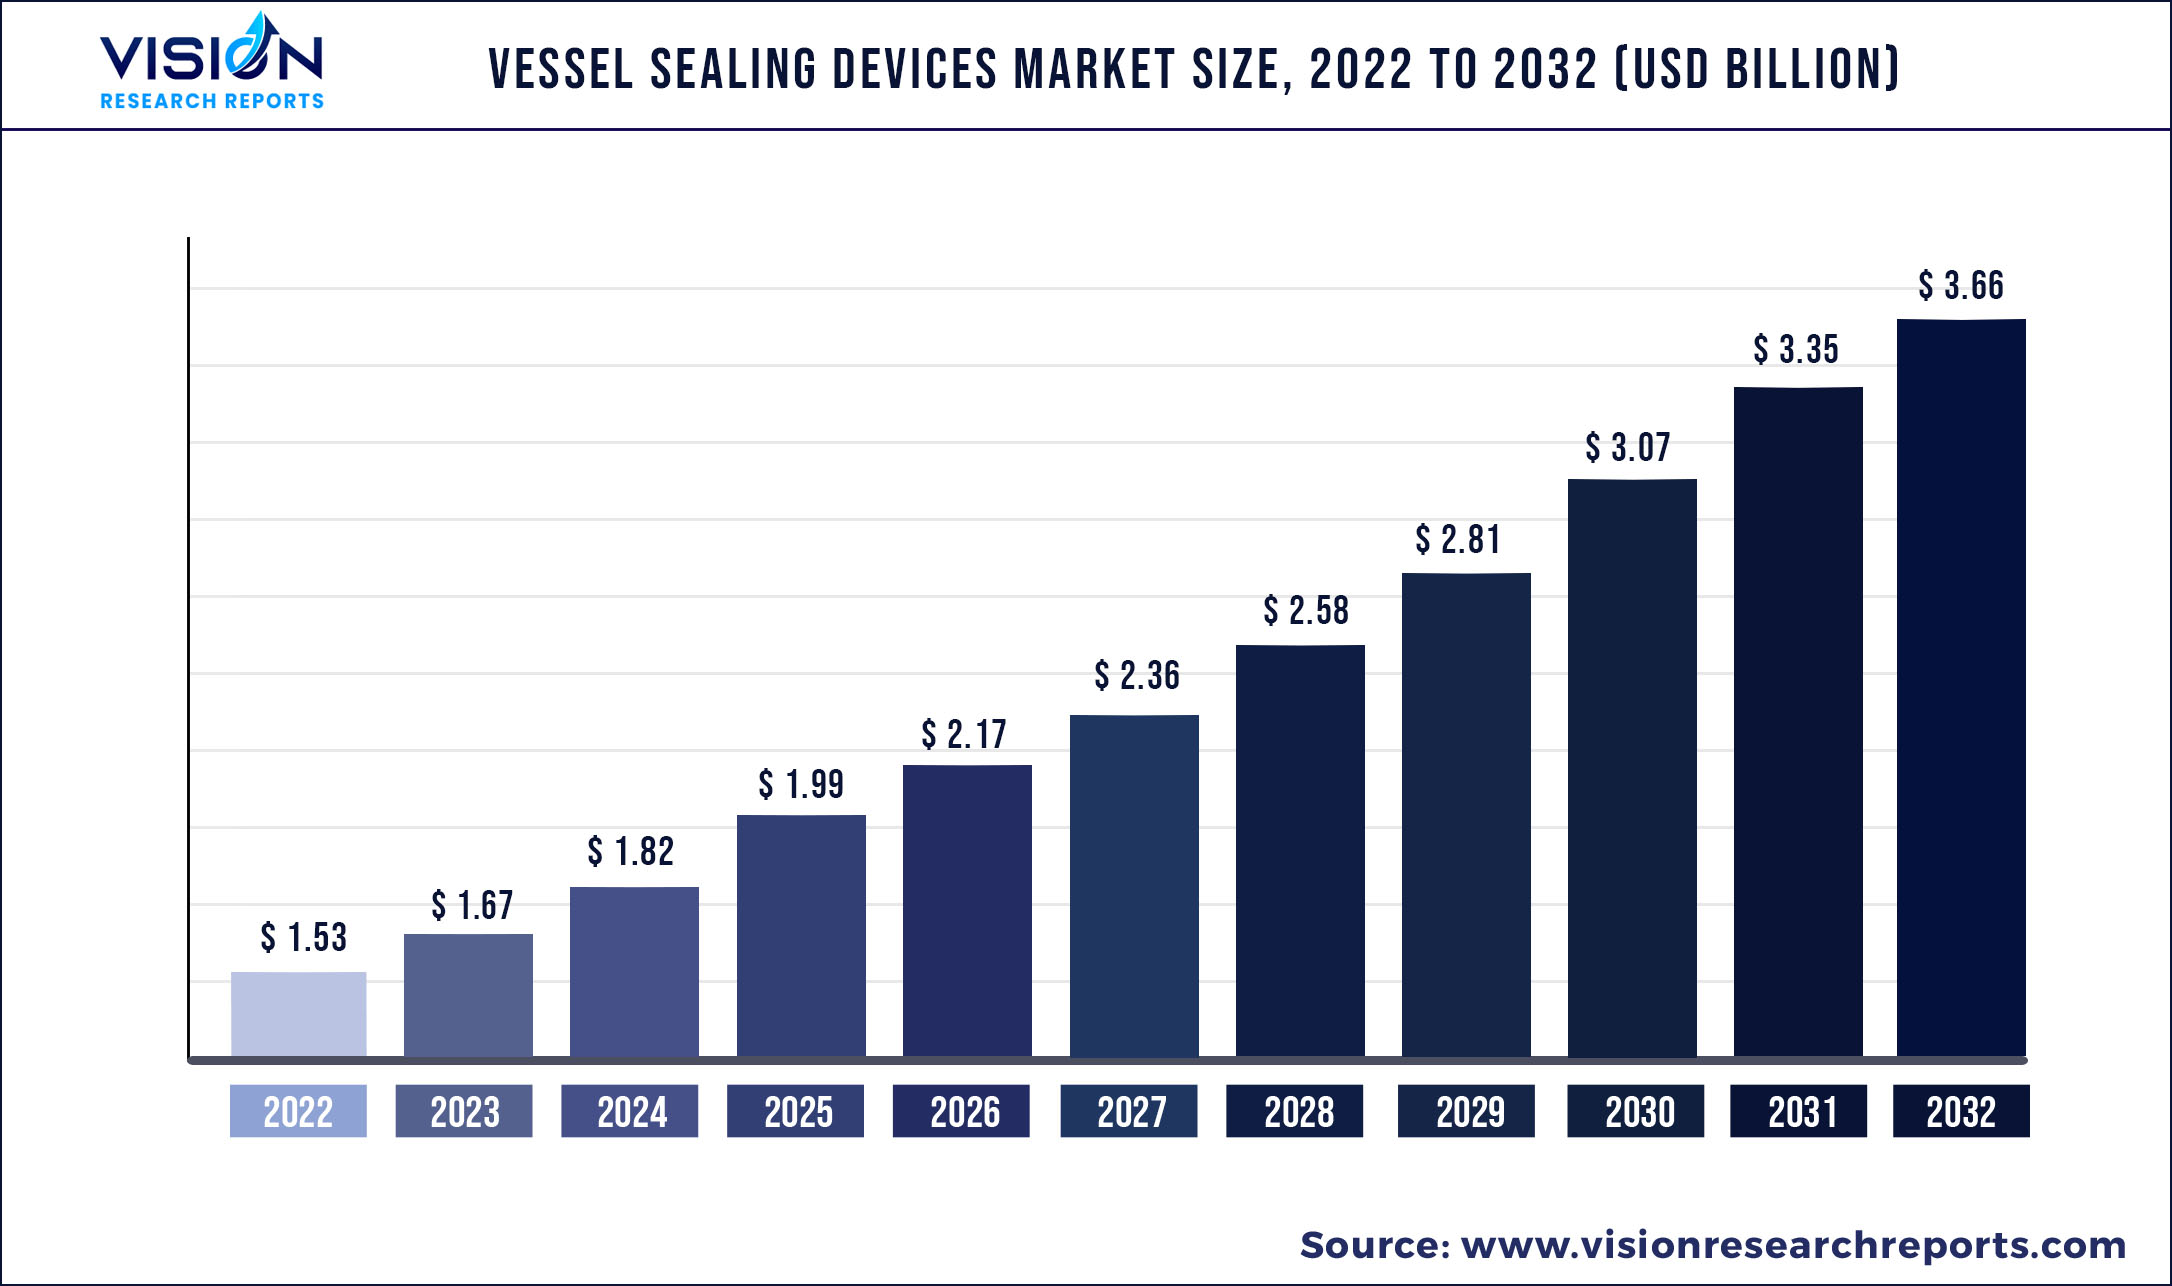 Vessel Sealing Devices Market Size 2022 to 2032